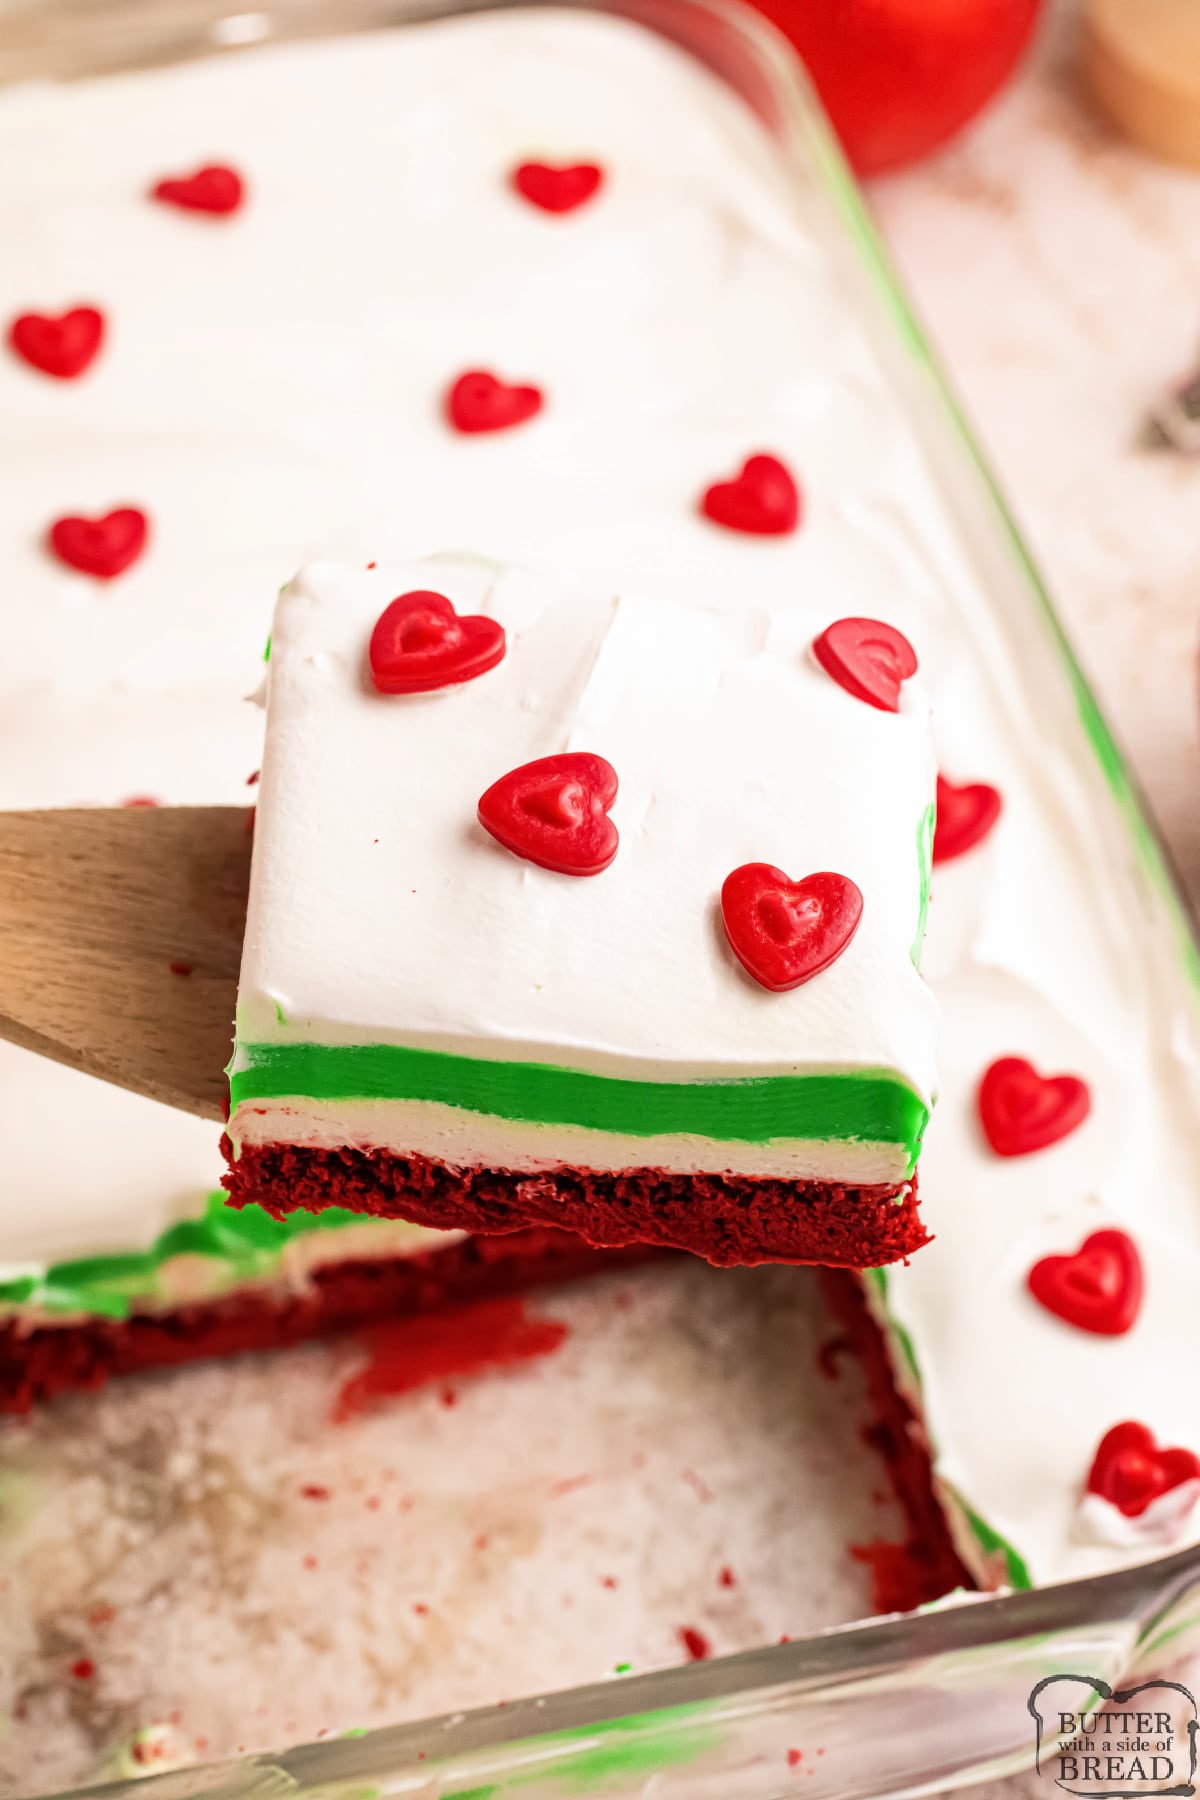 Piece of red, white and green dessert recipe. 